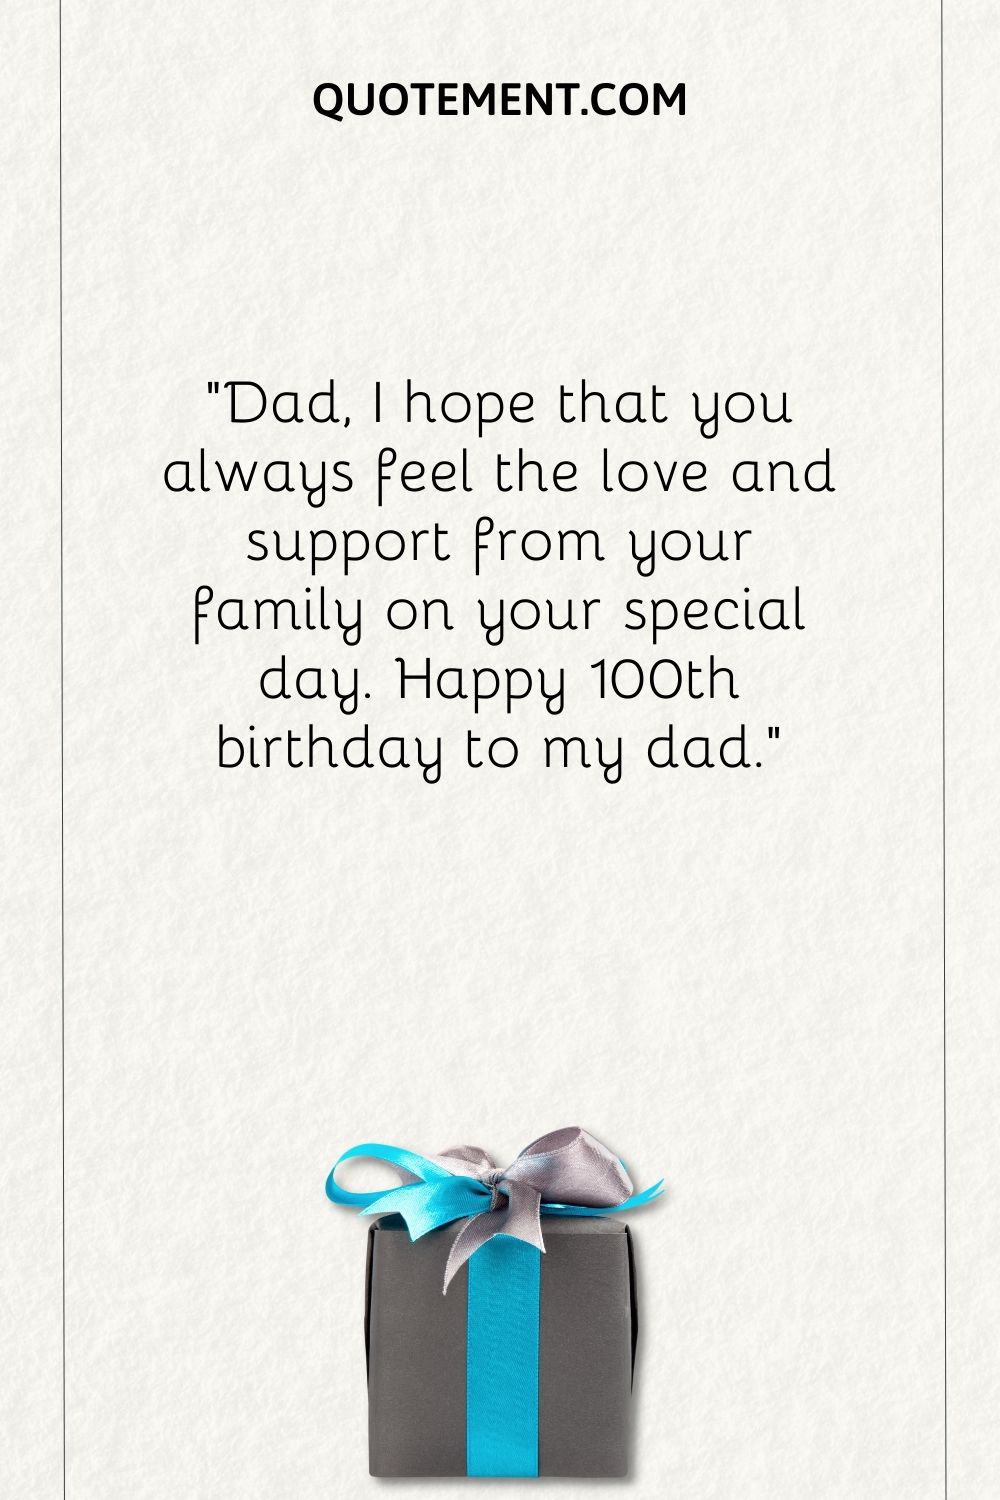 Dad, I hope that you always feel the love and support from your family on your special day.